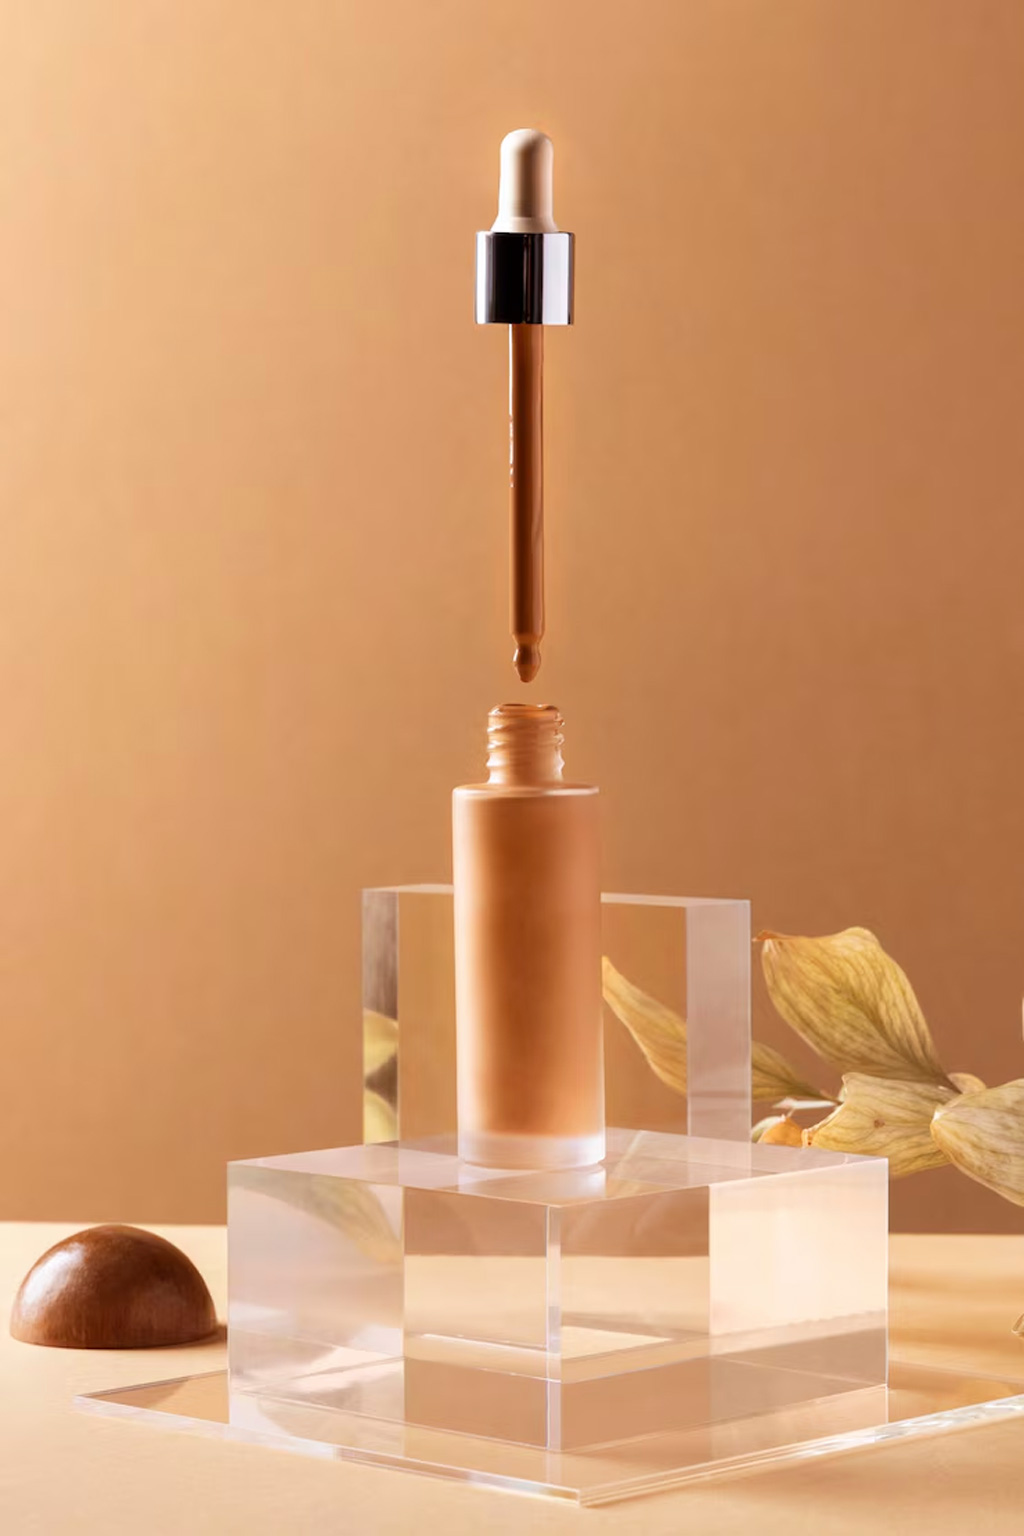 Serum foundations: what they are and the 8 best ones to try